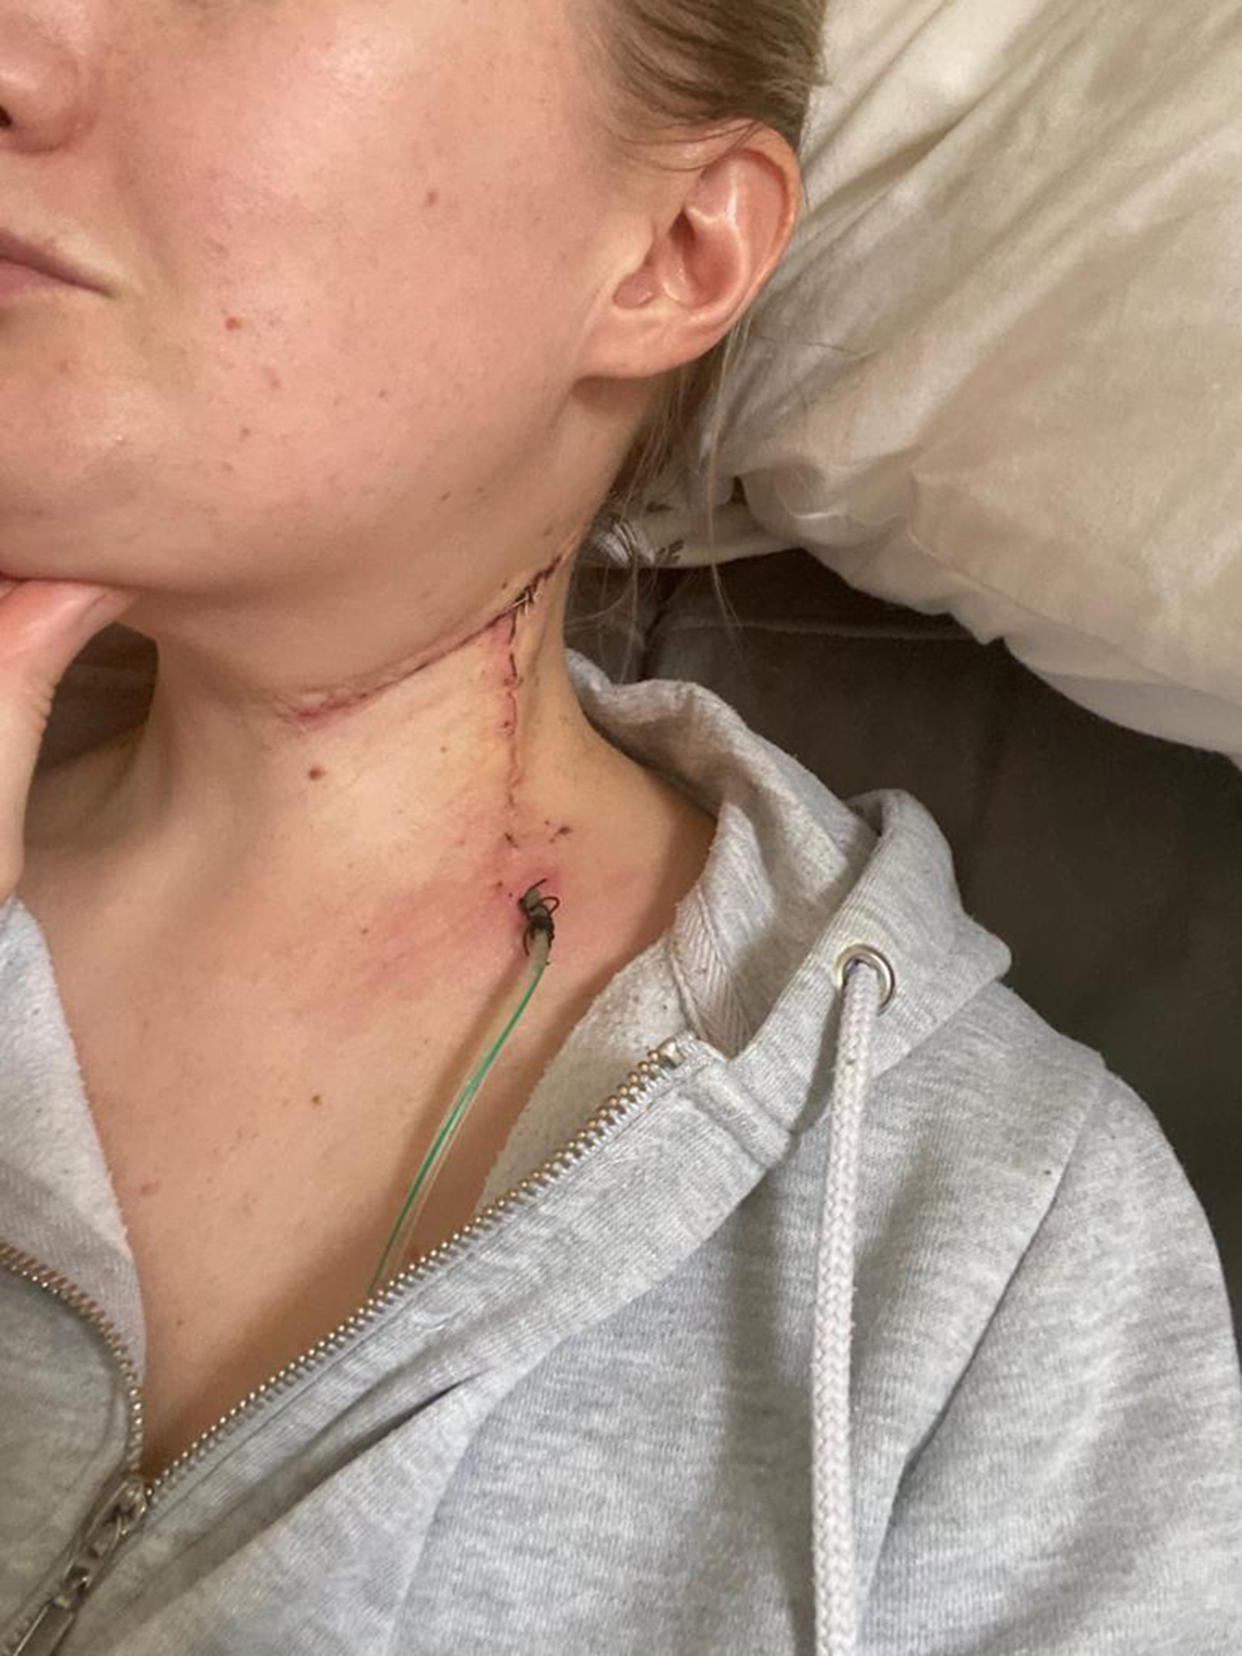 Lee said the surgery to remove 24 lymph nodes from her neck 